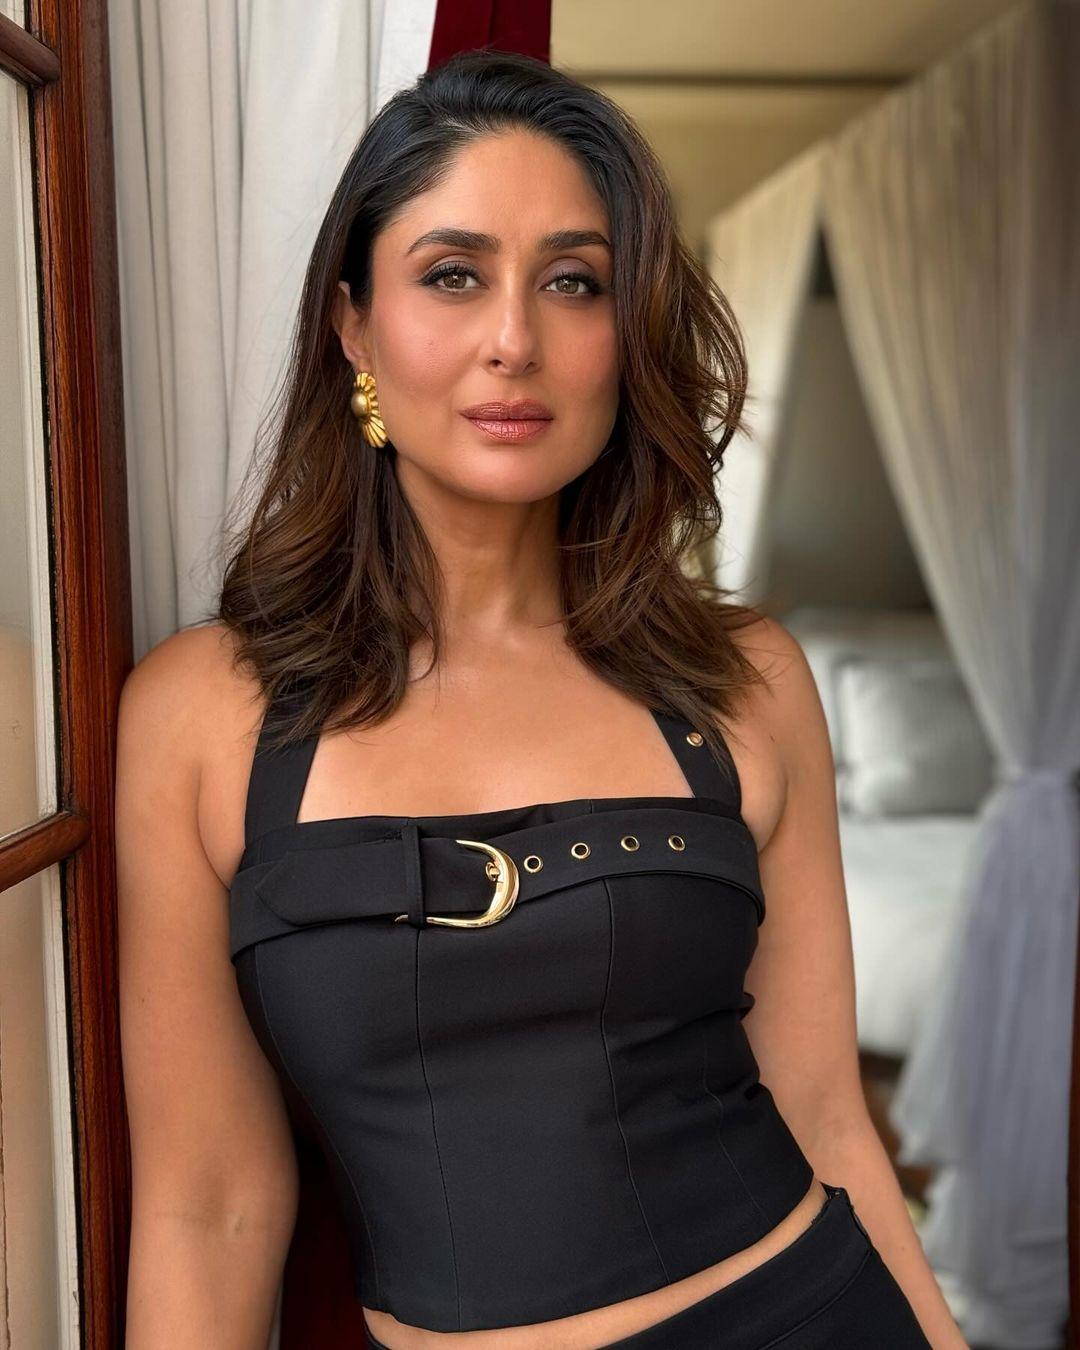 With minimal makeup accentuating her natural beauty, Bebo ditched heavy jewellery and finished her look with simple earrings